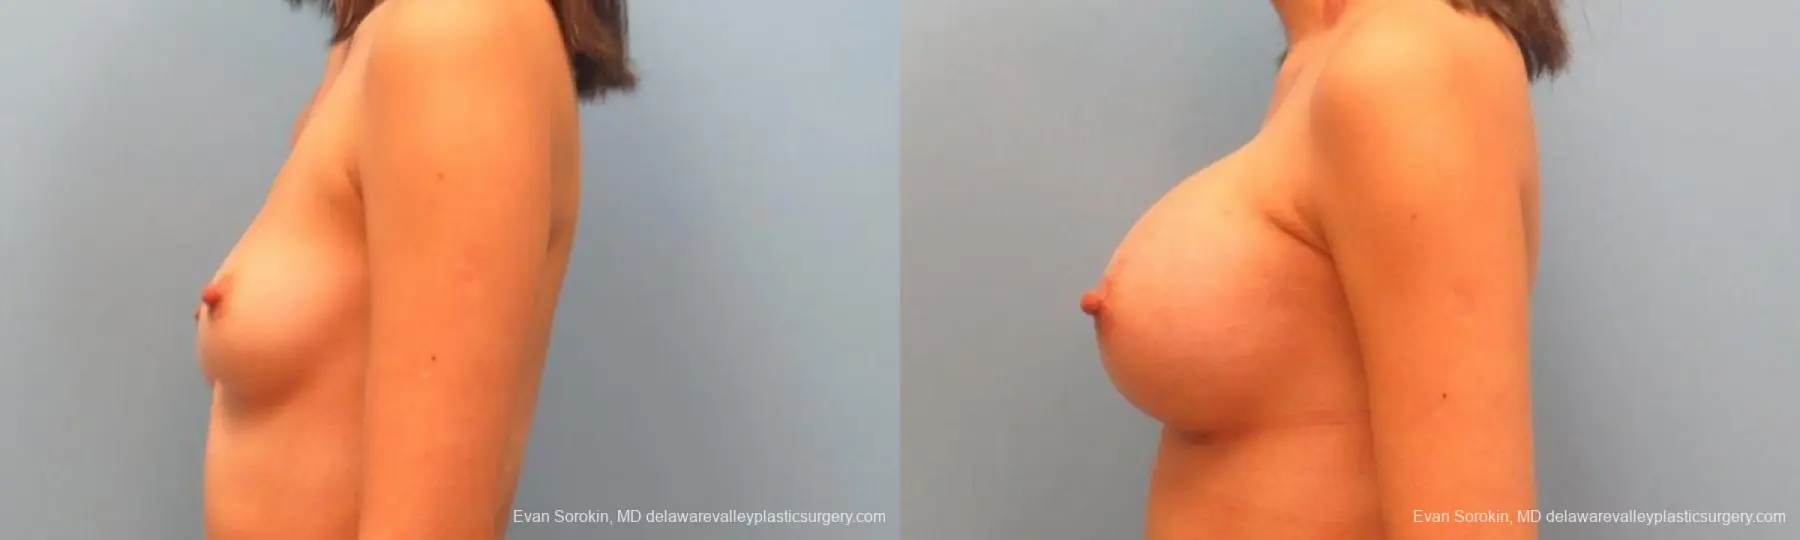 Philadelphia Breast Augmentation 9342 - Before and After 5